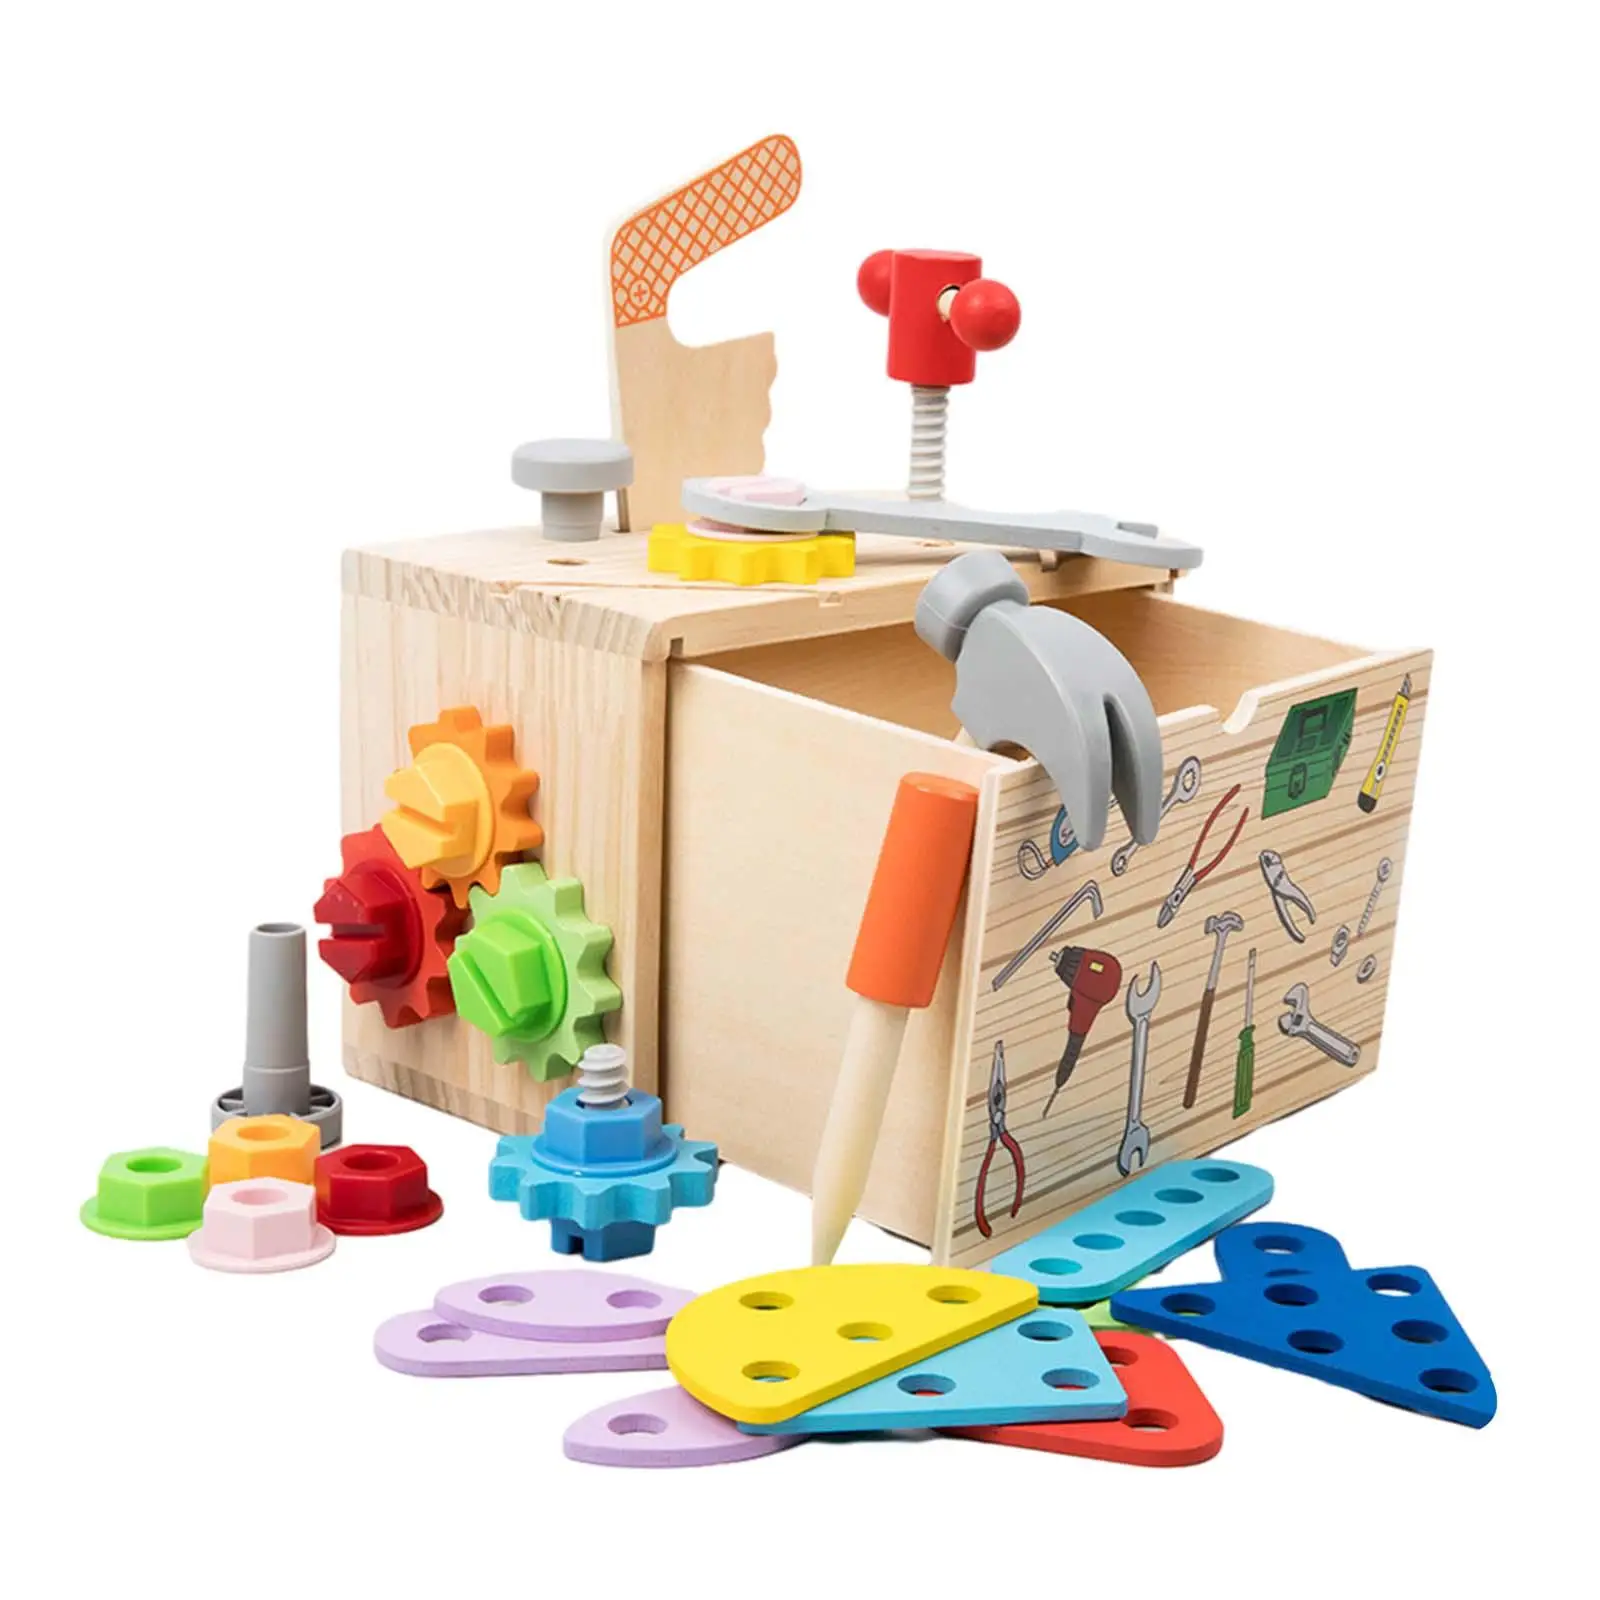 Wooden Toolbox Toy DIY Creative Educational Gifts Role Playing Kids Play Tool Set for Holiday Birthday Ages 3+ Festivals Present